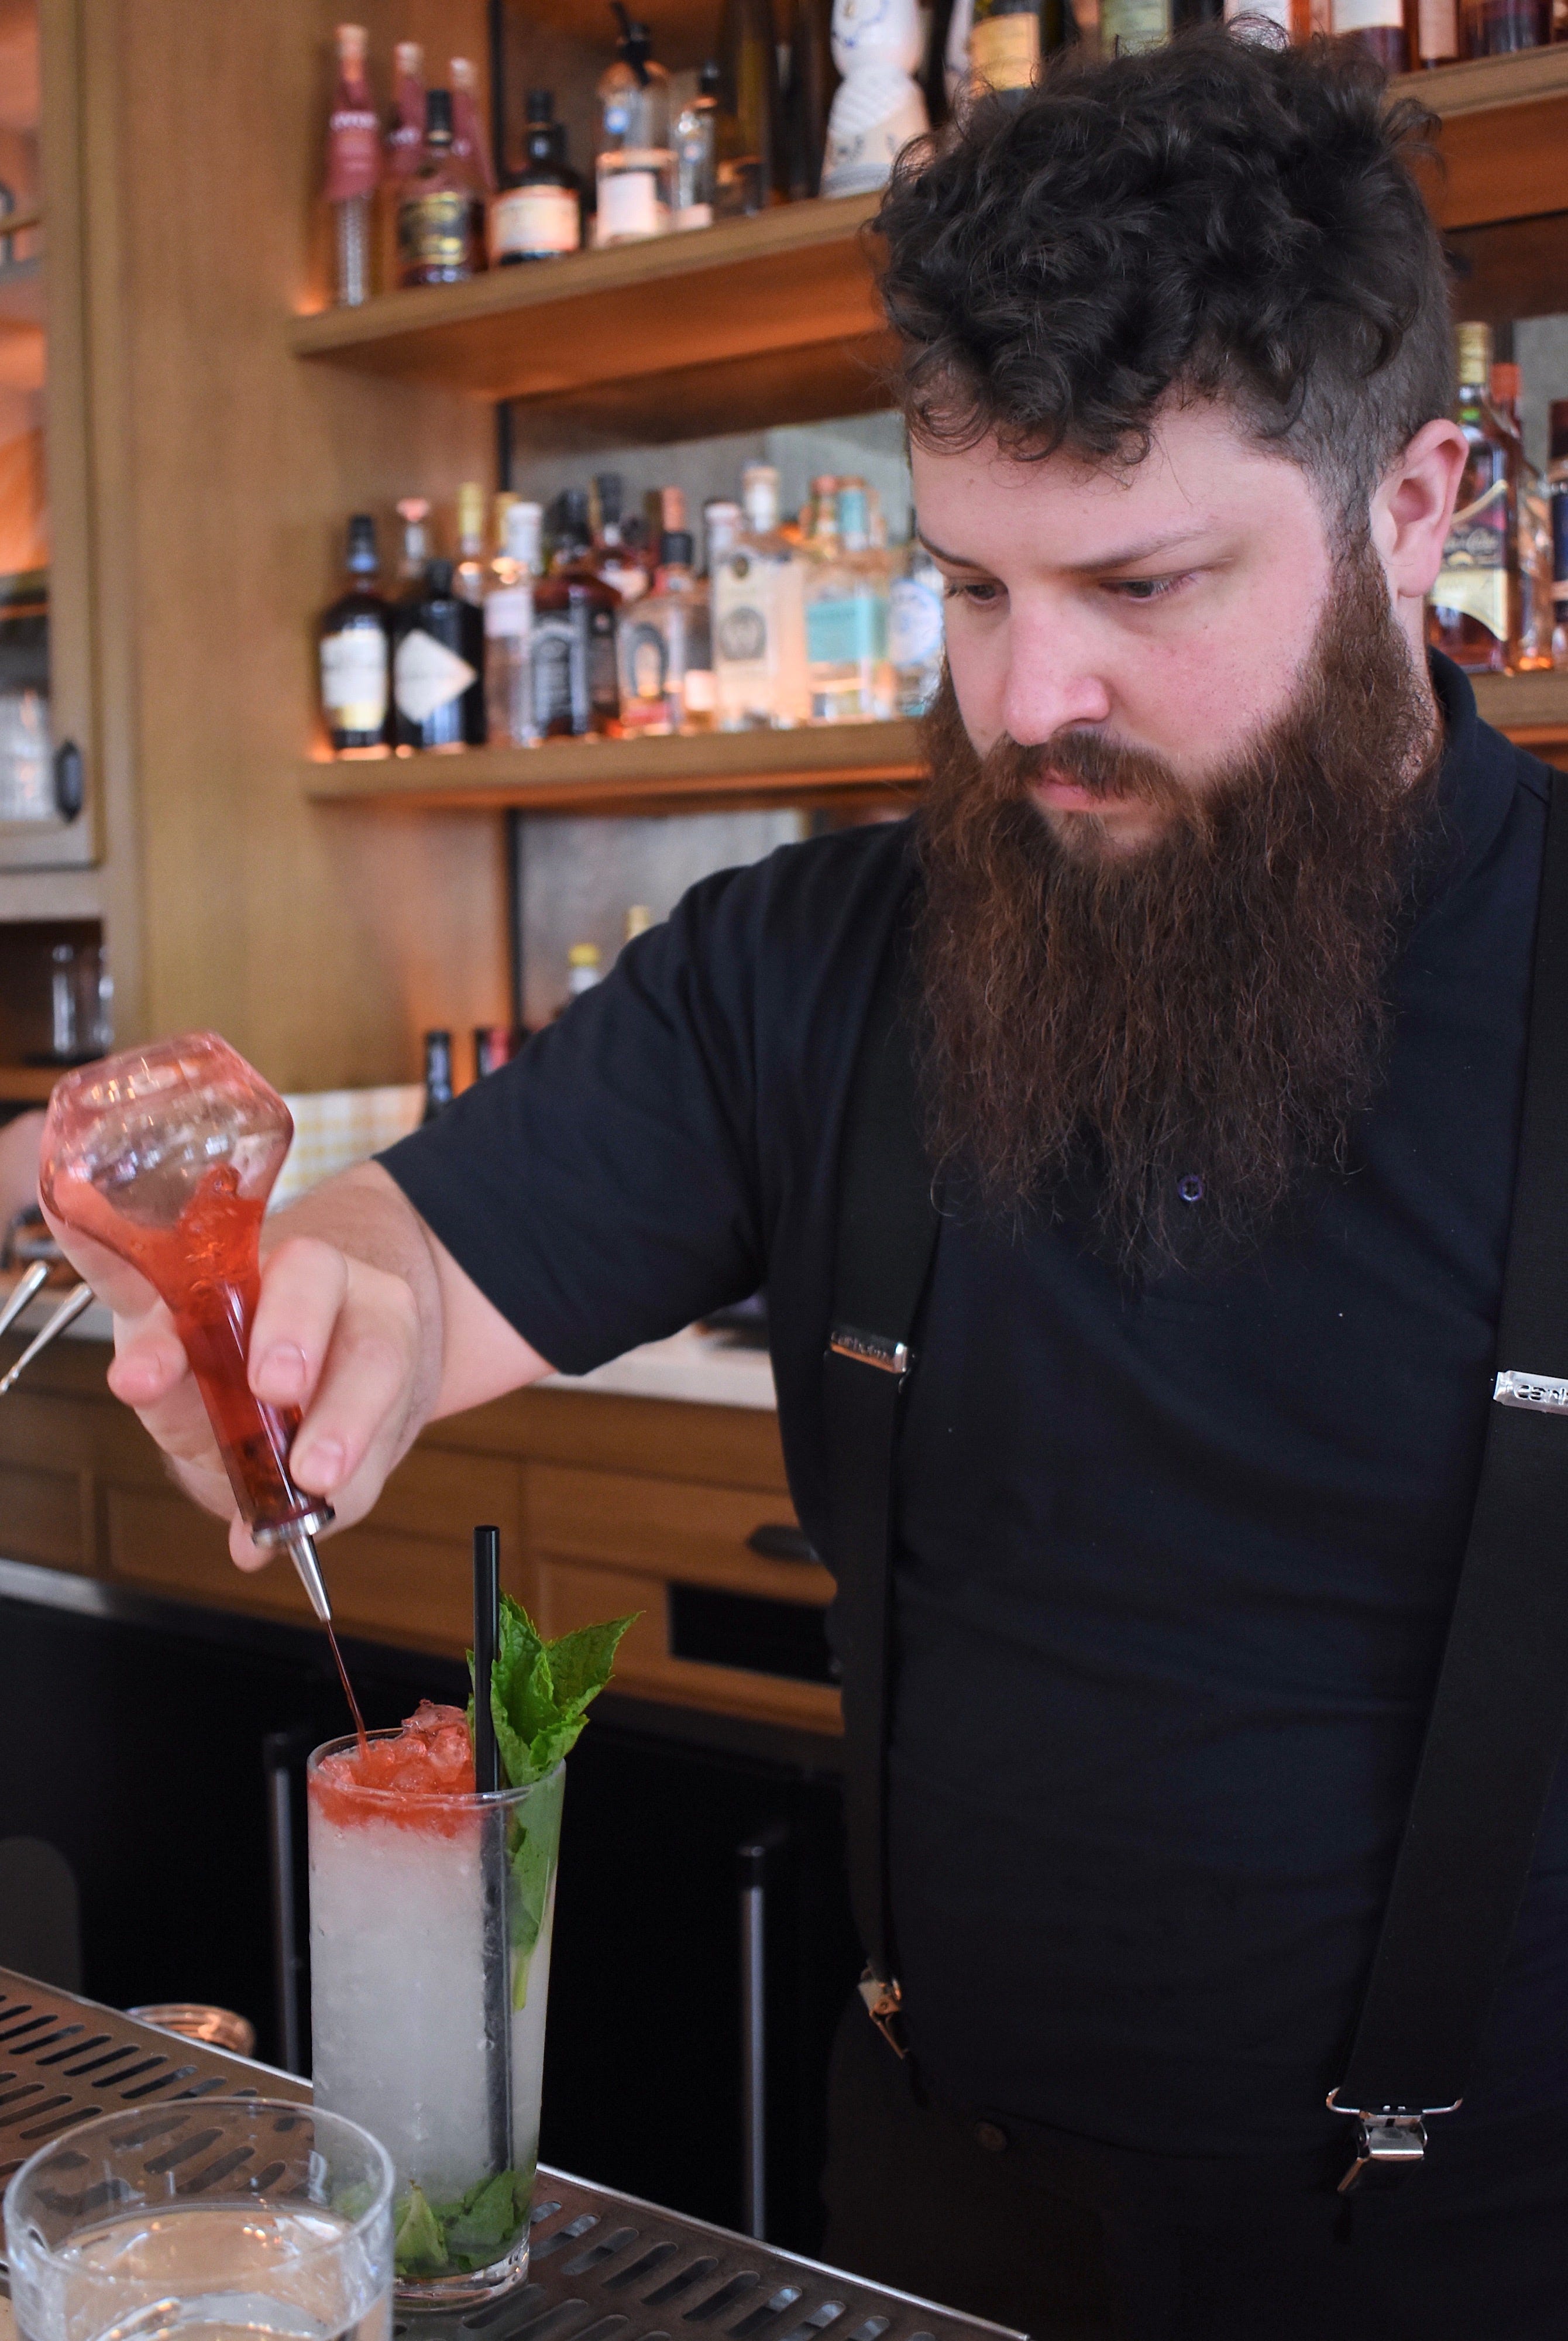 Lead bartender Chas Williams tops a house cocktail called the " Tricolore Spritz " with Peychaud ’ s bitters. The drink is a mixture of lime, cucumber syrup, gin, and Prosecco that bears the same colors as the Italian flag.